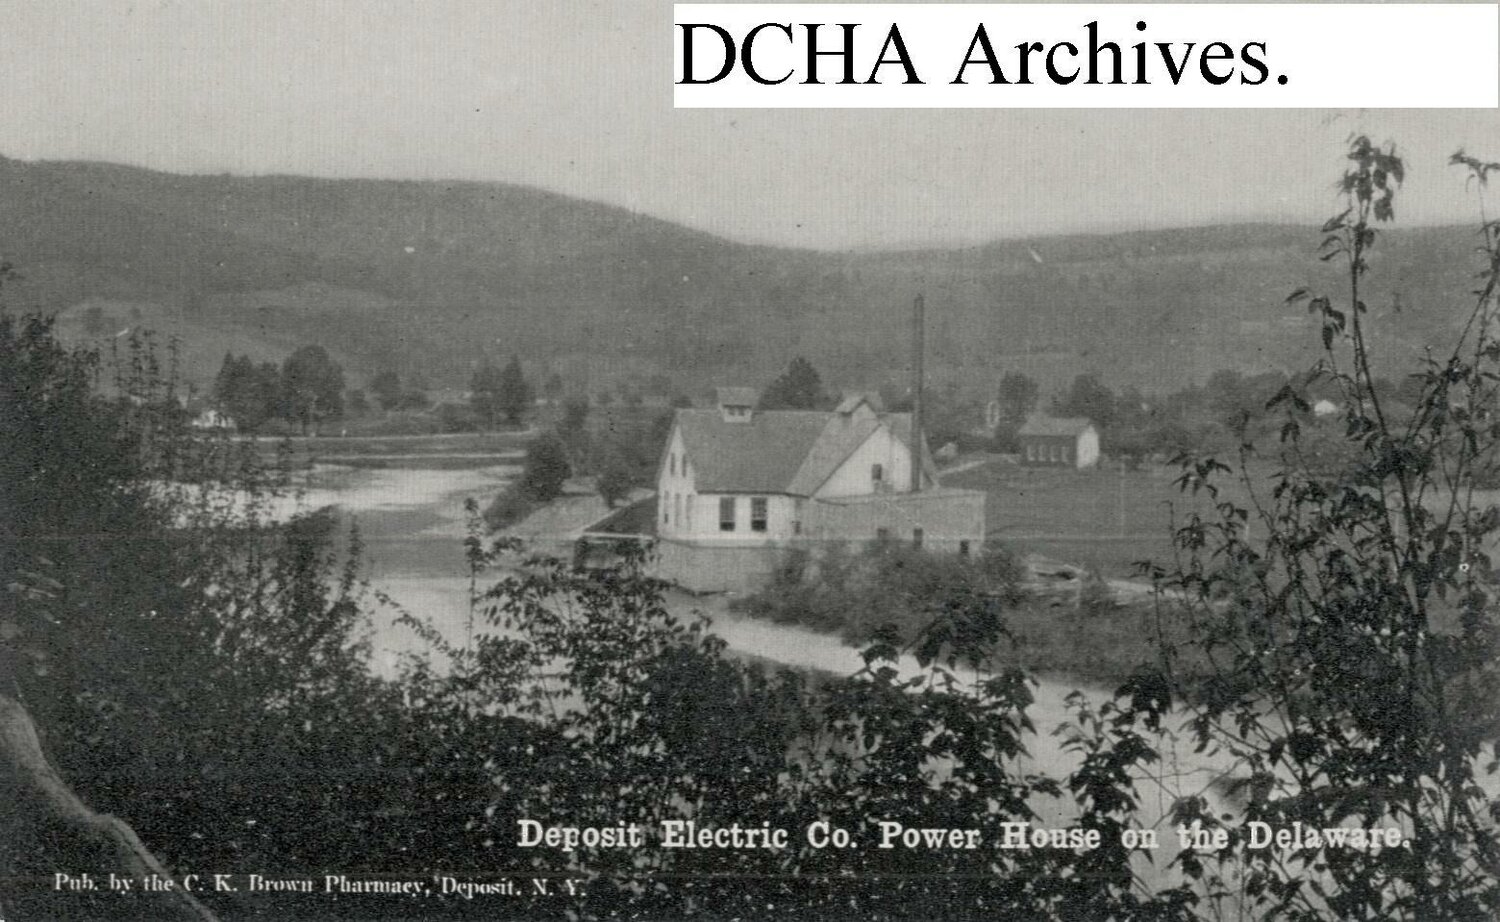 Deposit Electric Co. Power House on the Delaware.